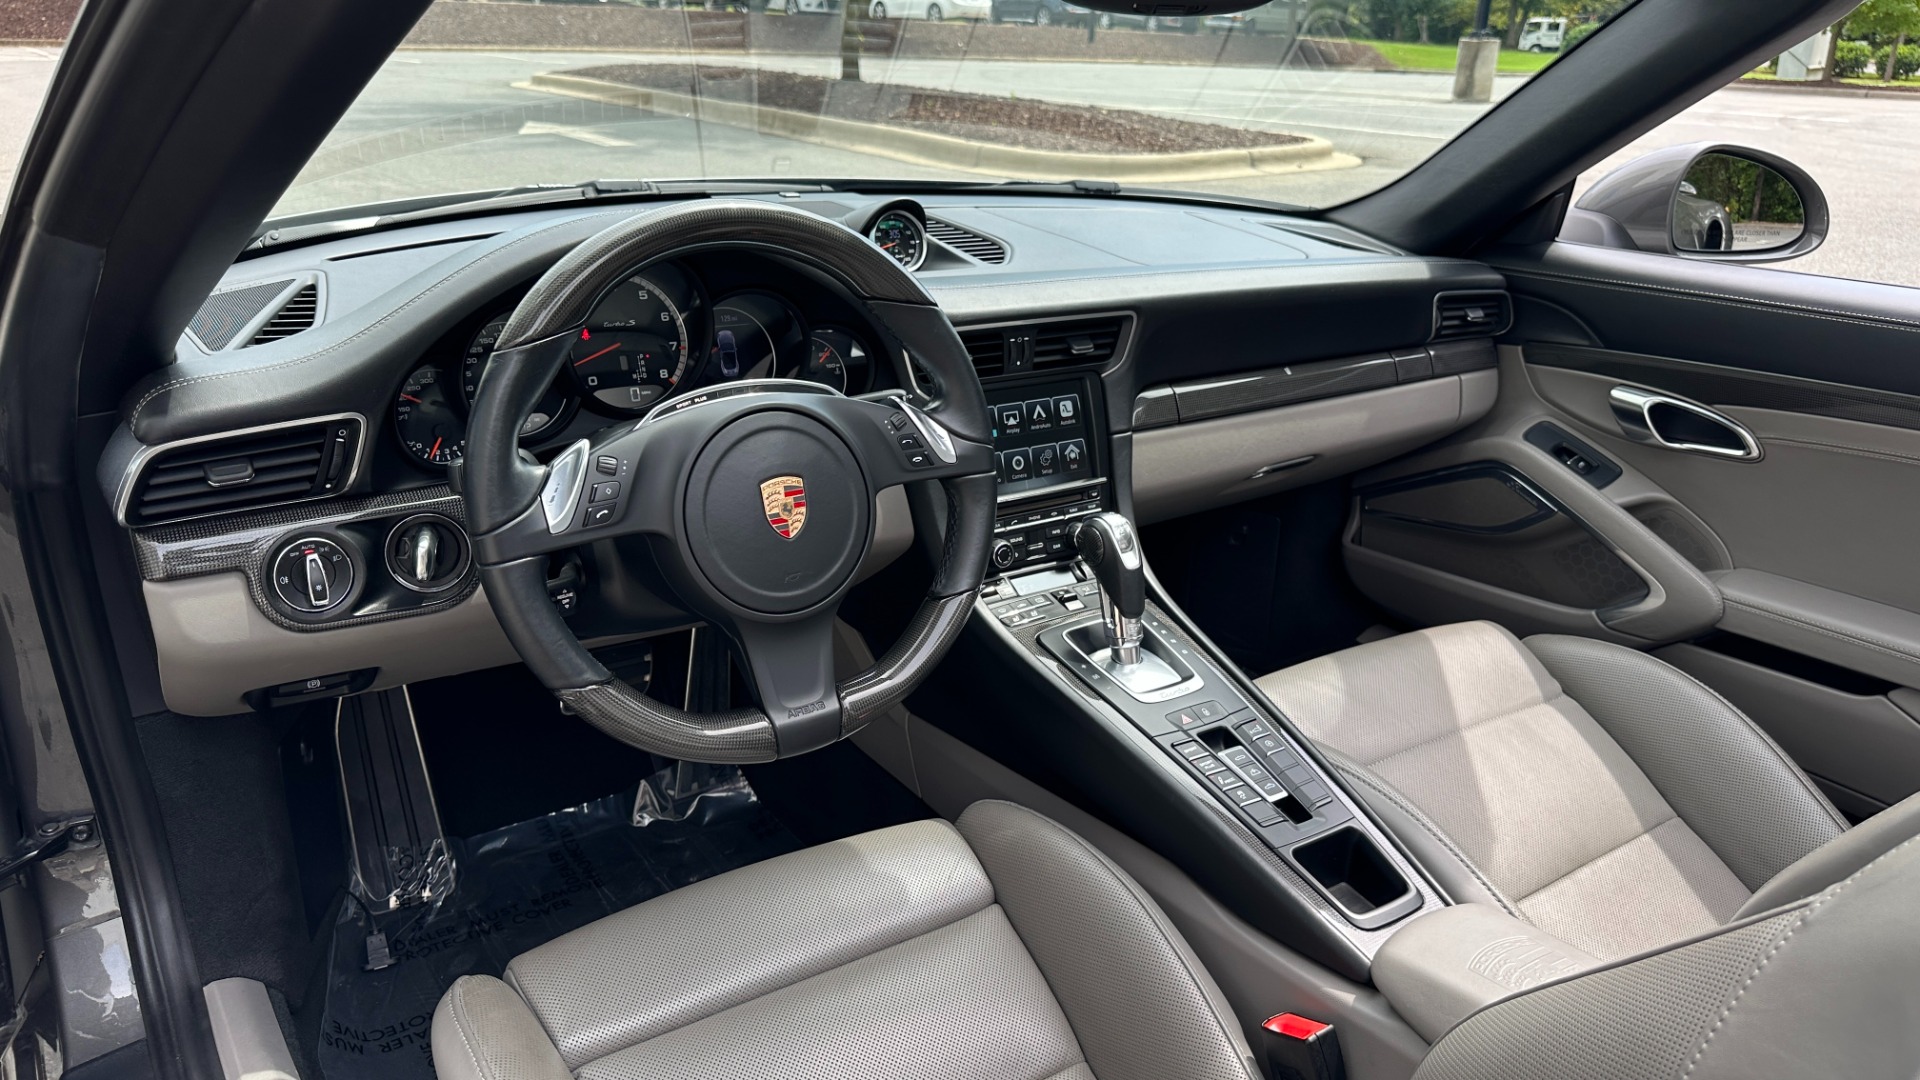 Used 2015 Porsche 911 TURBO S / BYDESIGN STAGE 4.2 POWER PACKAGE / $30K IN UPGRADES / APPLE CARPL for sale $118,999 at Formula Imports in Charlotte NC 28227 20